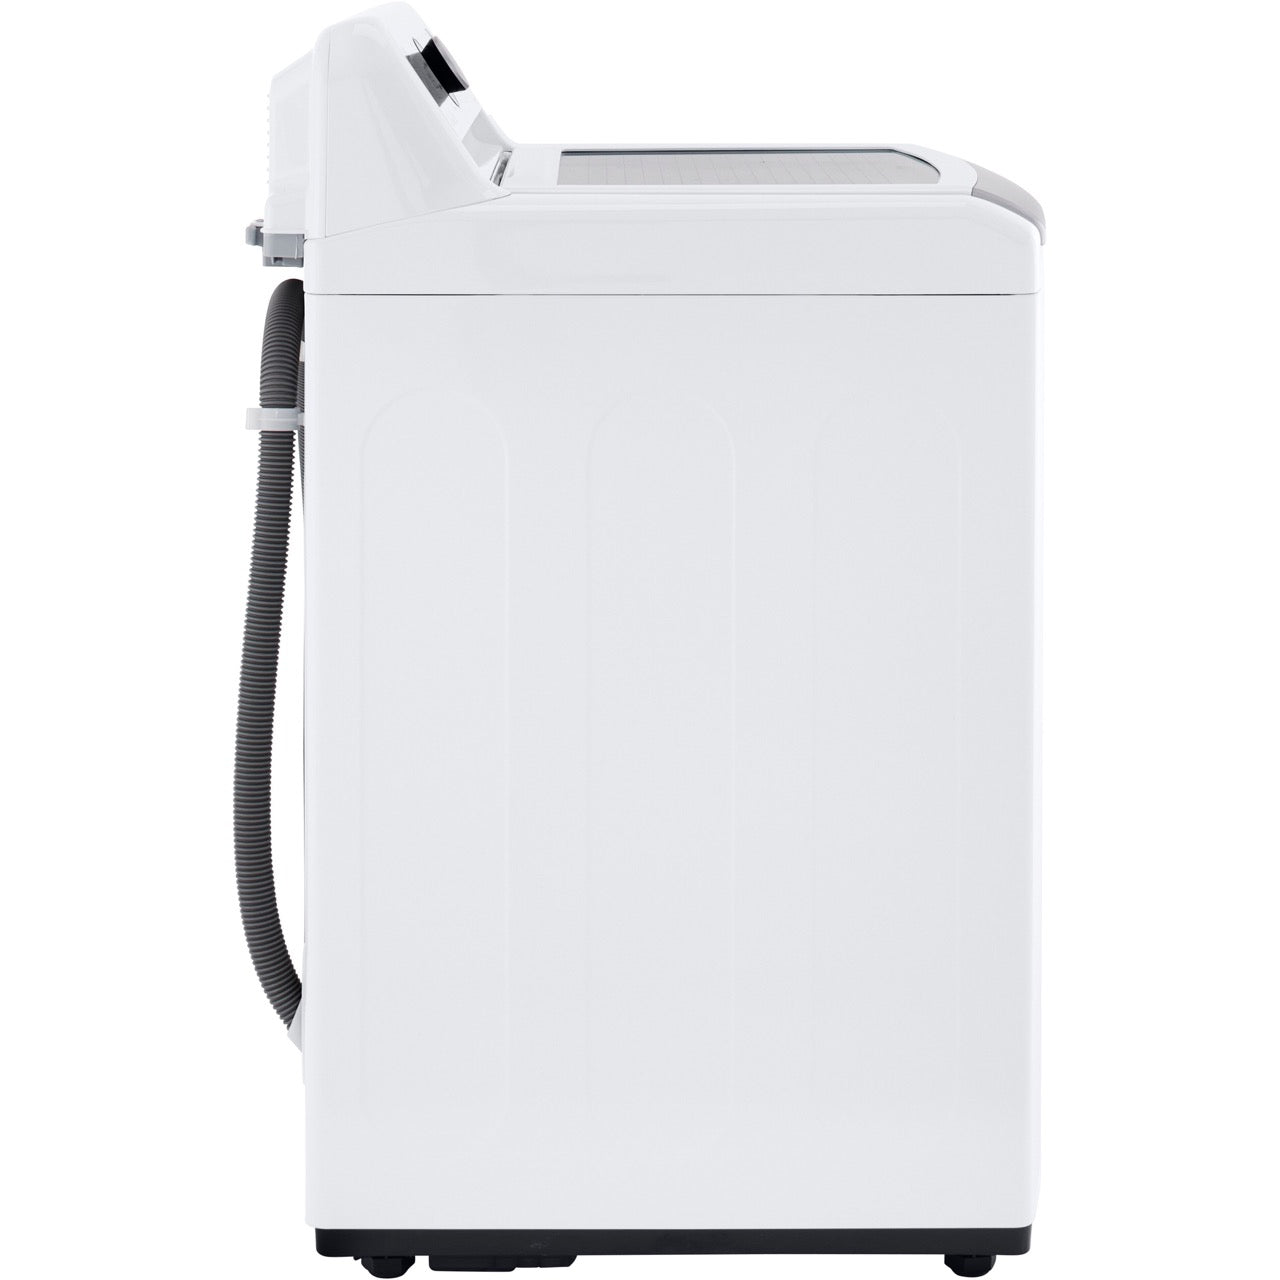 LG Electronics 5.0-Cu. Ft. Mega Capacity Top Load Washer with TurboDrum Technology (WT7150CW)